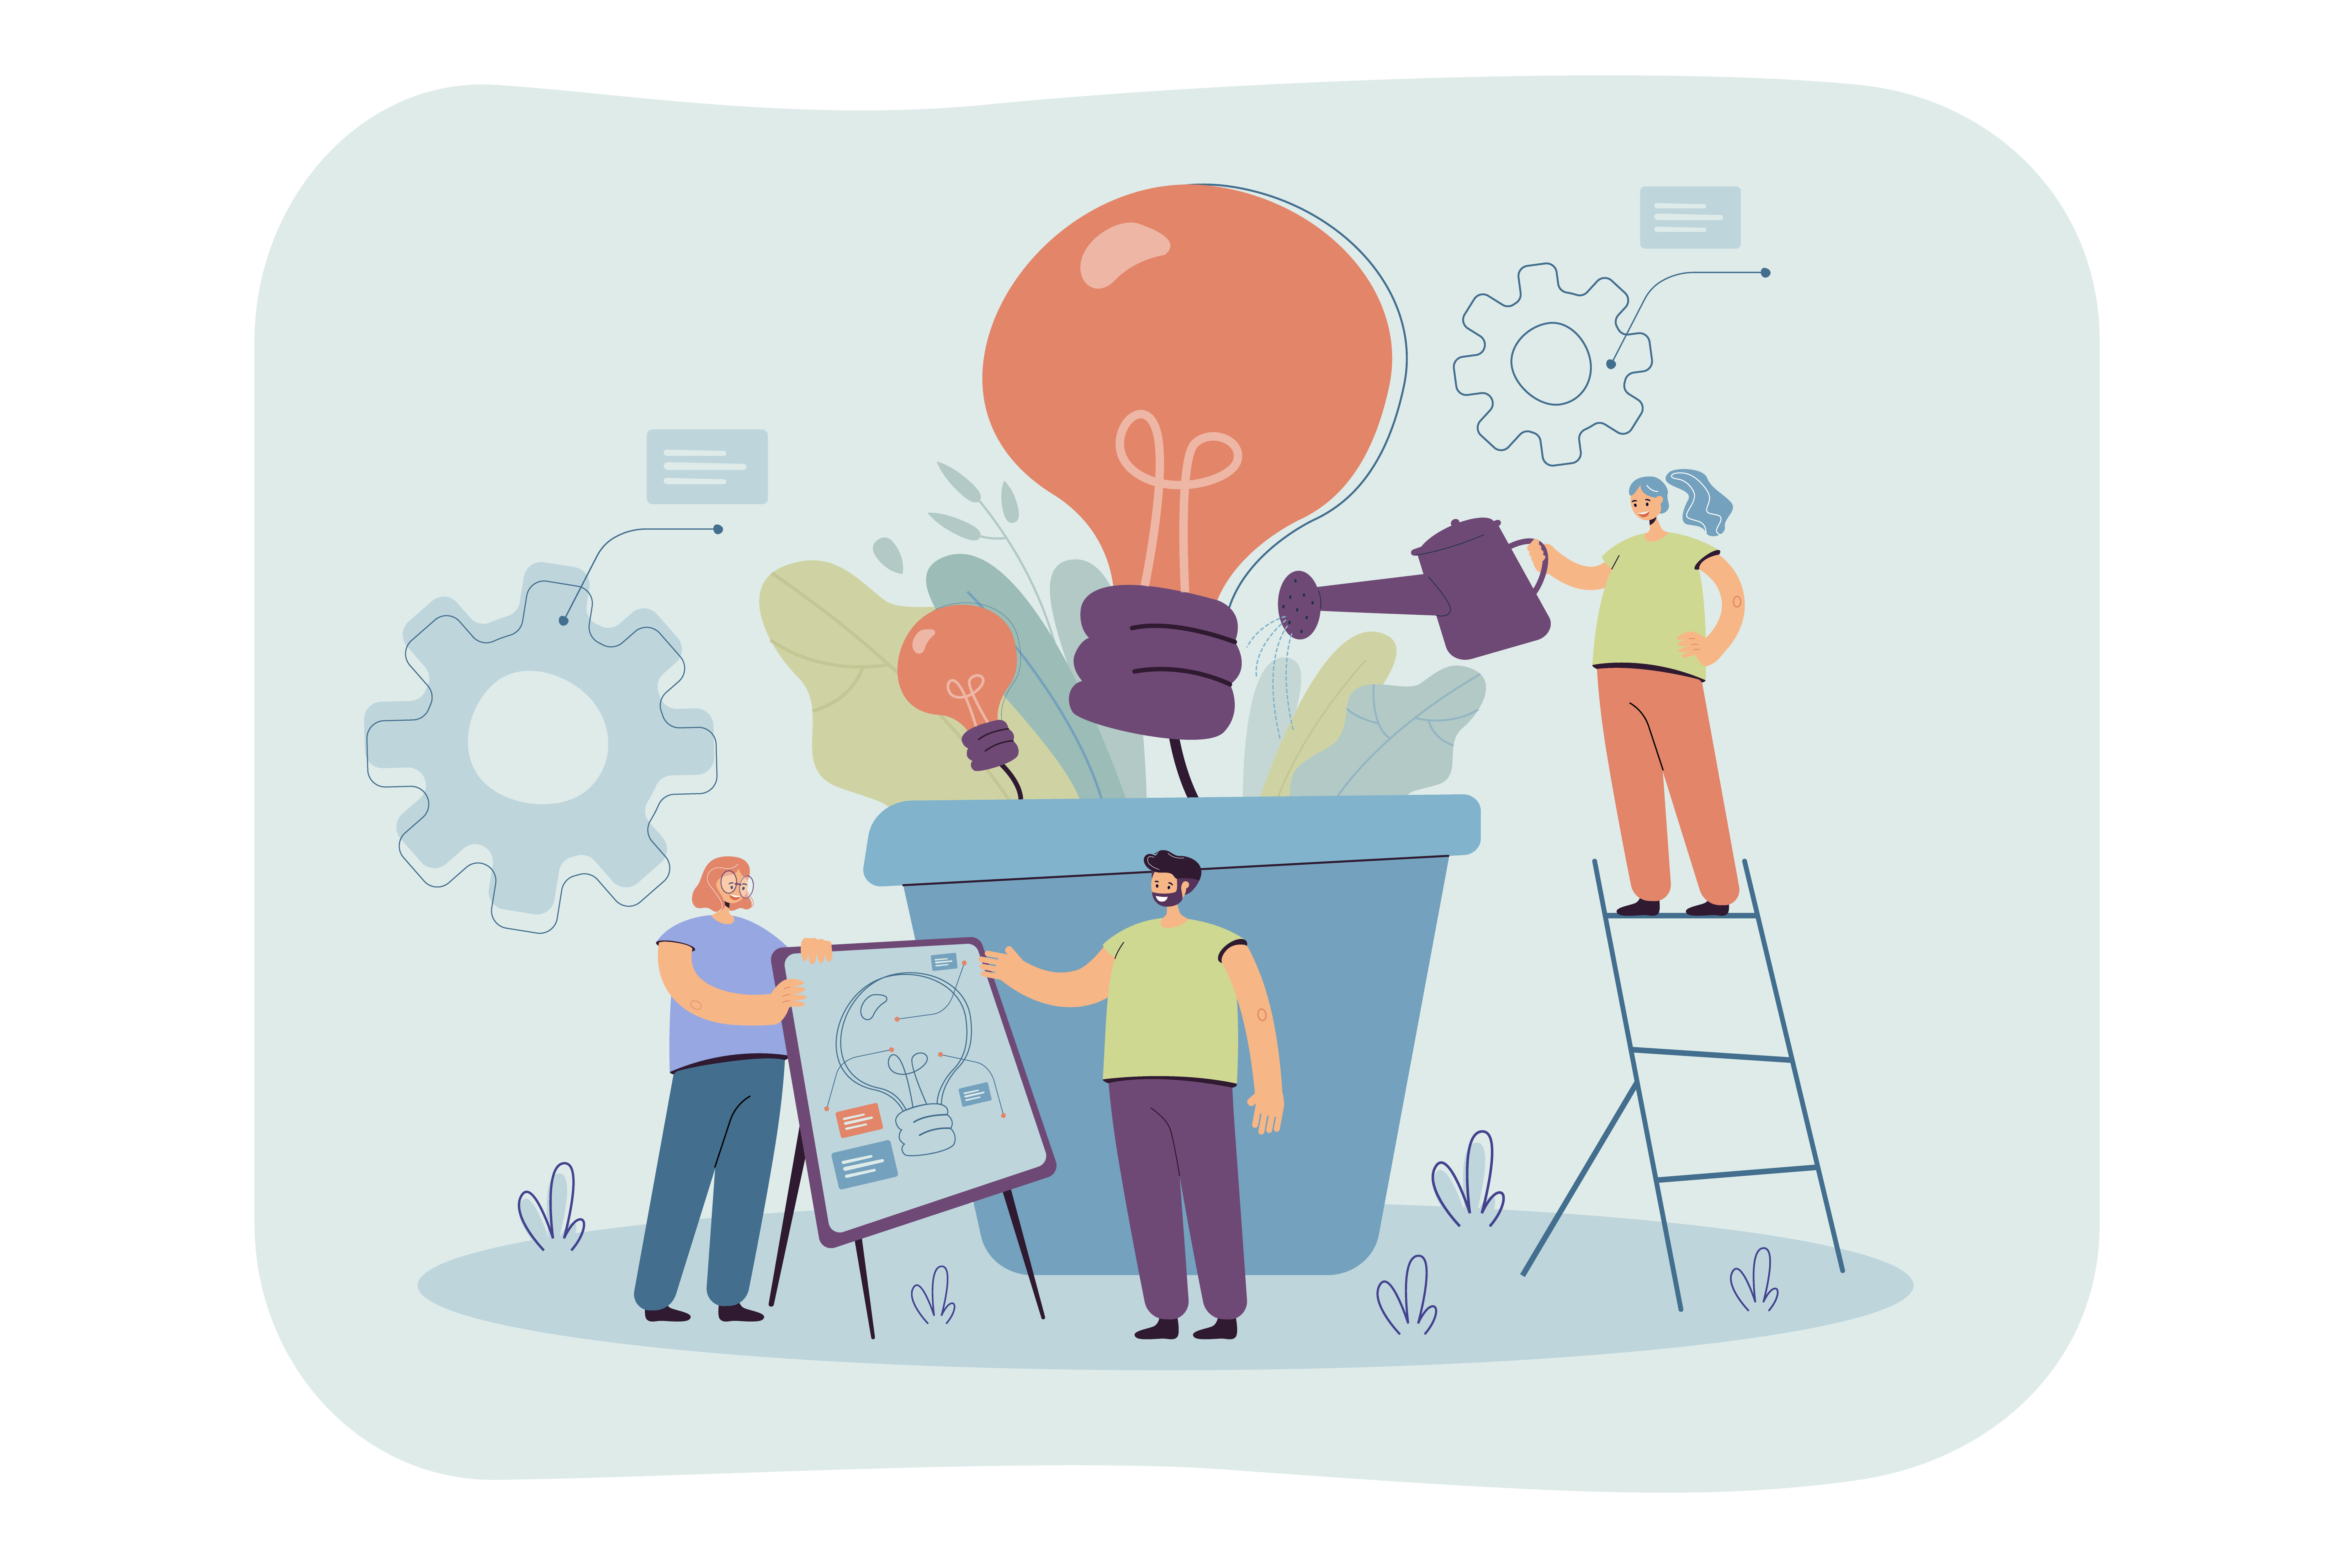 Team growing lightbulb plant. Business people creating ideas for climate change, environment, electricity. Flat vector illustration ecology, future, conservation teamwork concept